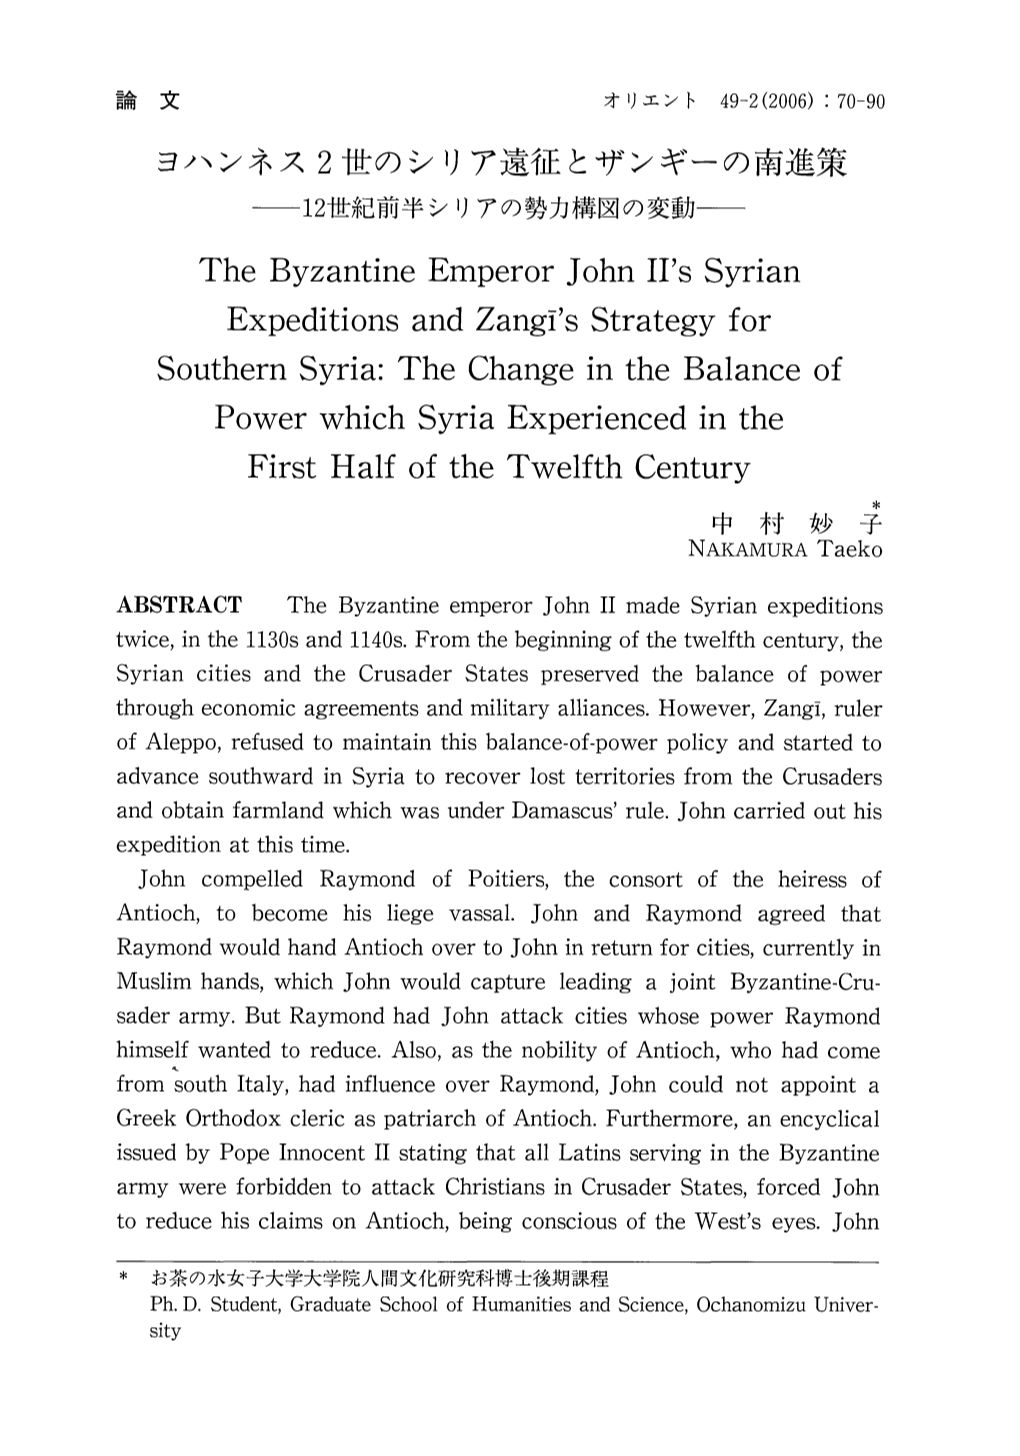 The Byzantine Emperor John II's Syrian Expeditions And